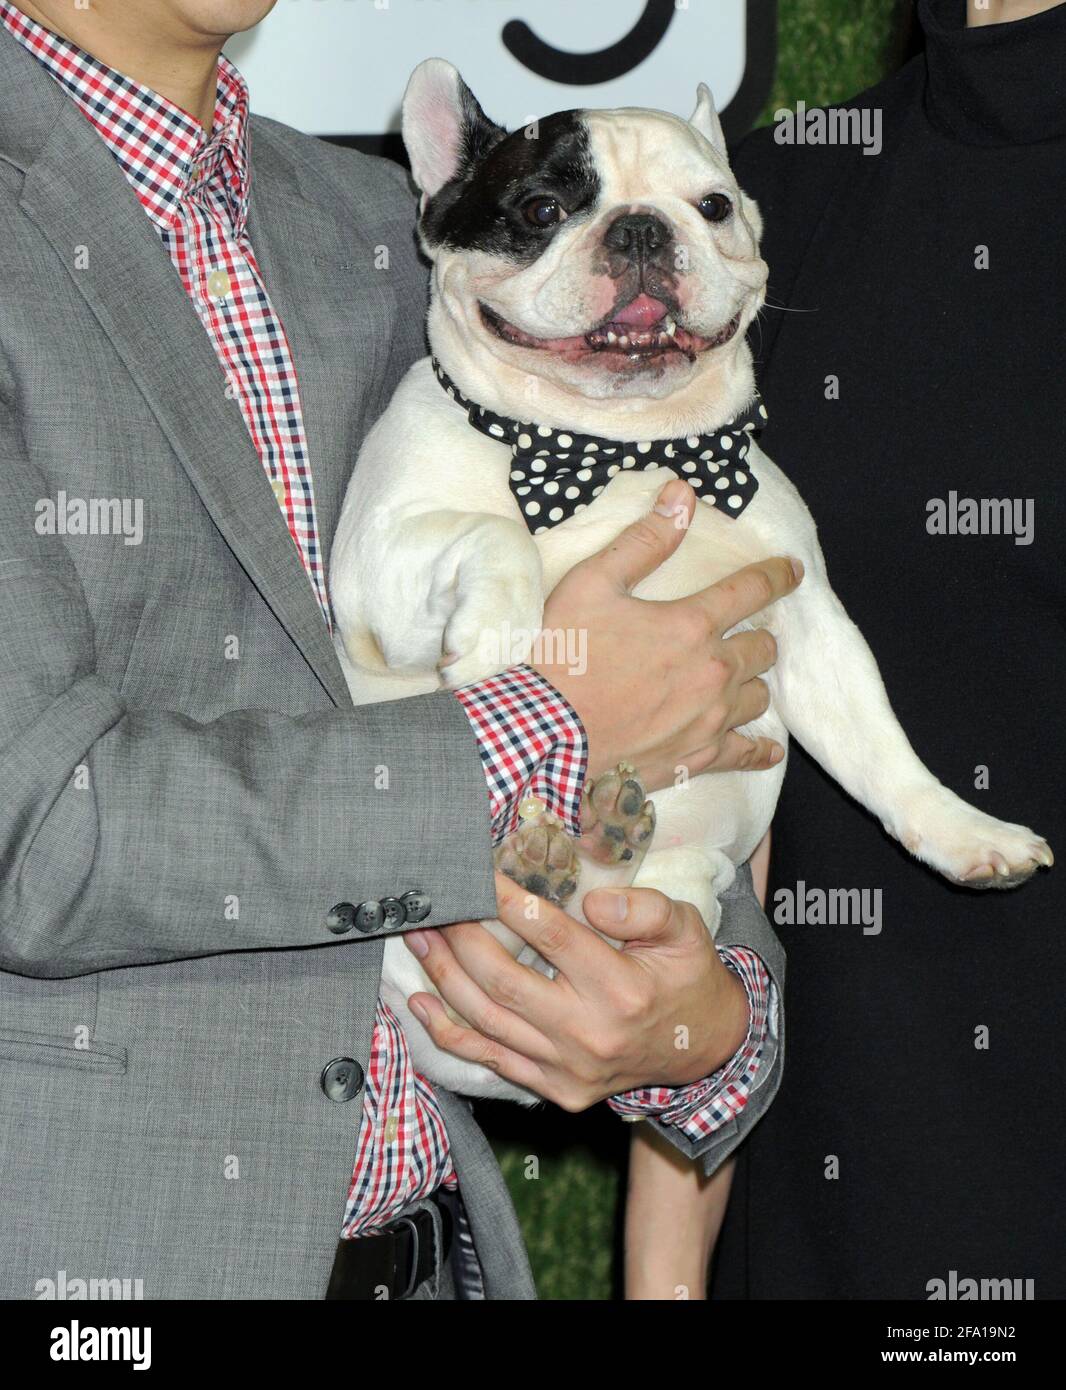 Manny the Frenchie on the green carpet during the 2016 World Dog Awards, held at Barker Hanger in Santa Monica, California, Saturday, January 9, 2016.  Photo by Jennifer Graylock-Graylock.com 917-519-7666 Stock Photo